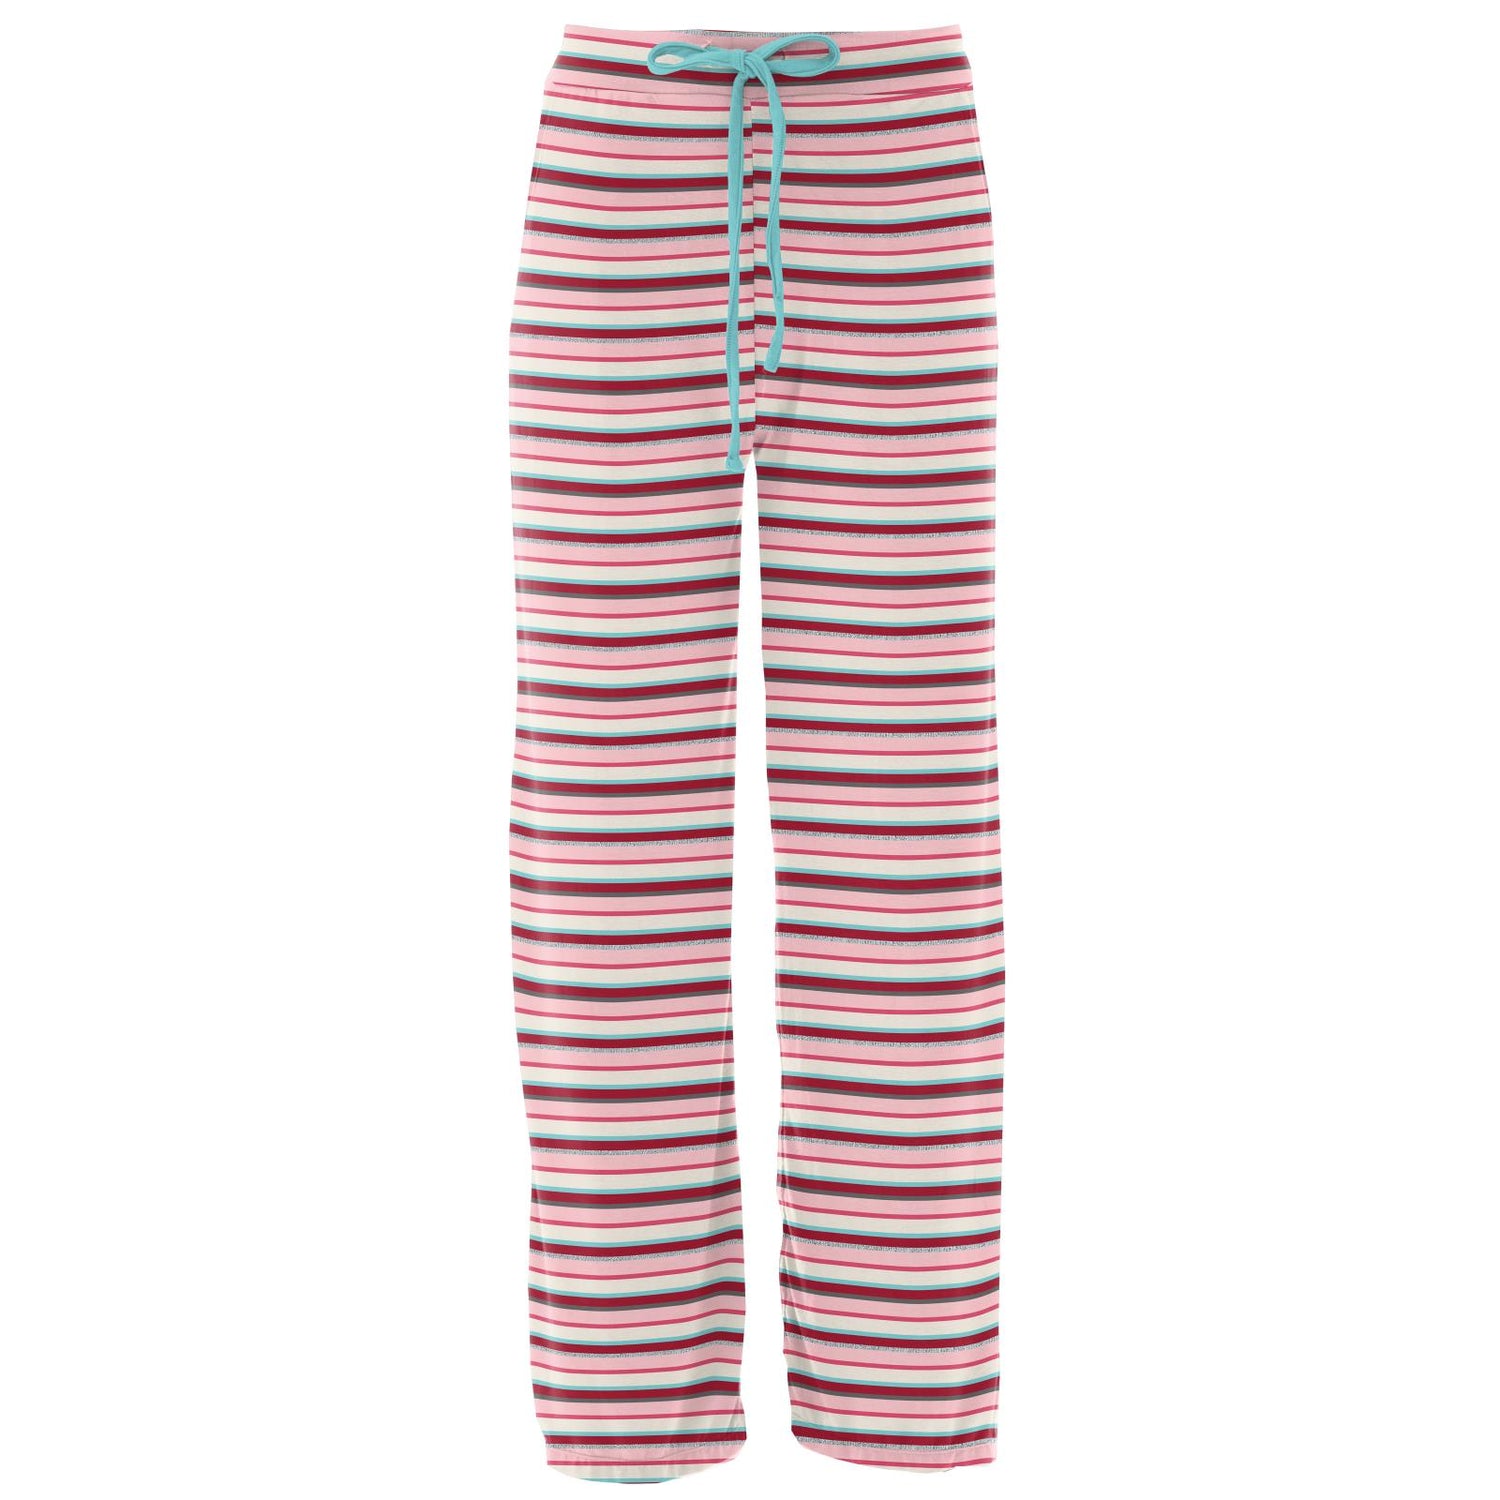 Women's Print Lounge Pants in Anniversary Bobsled Stripe